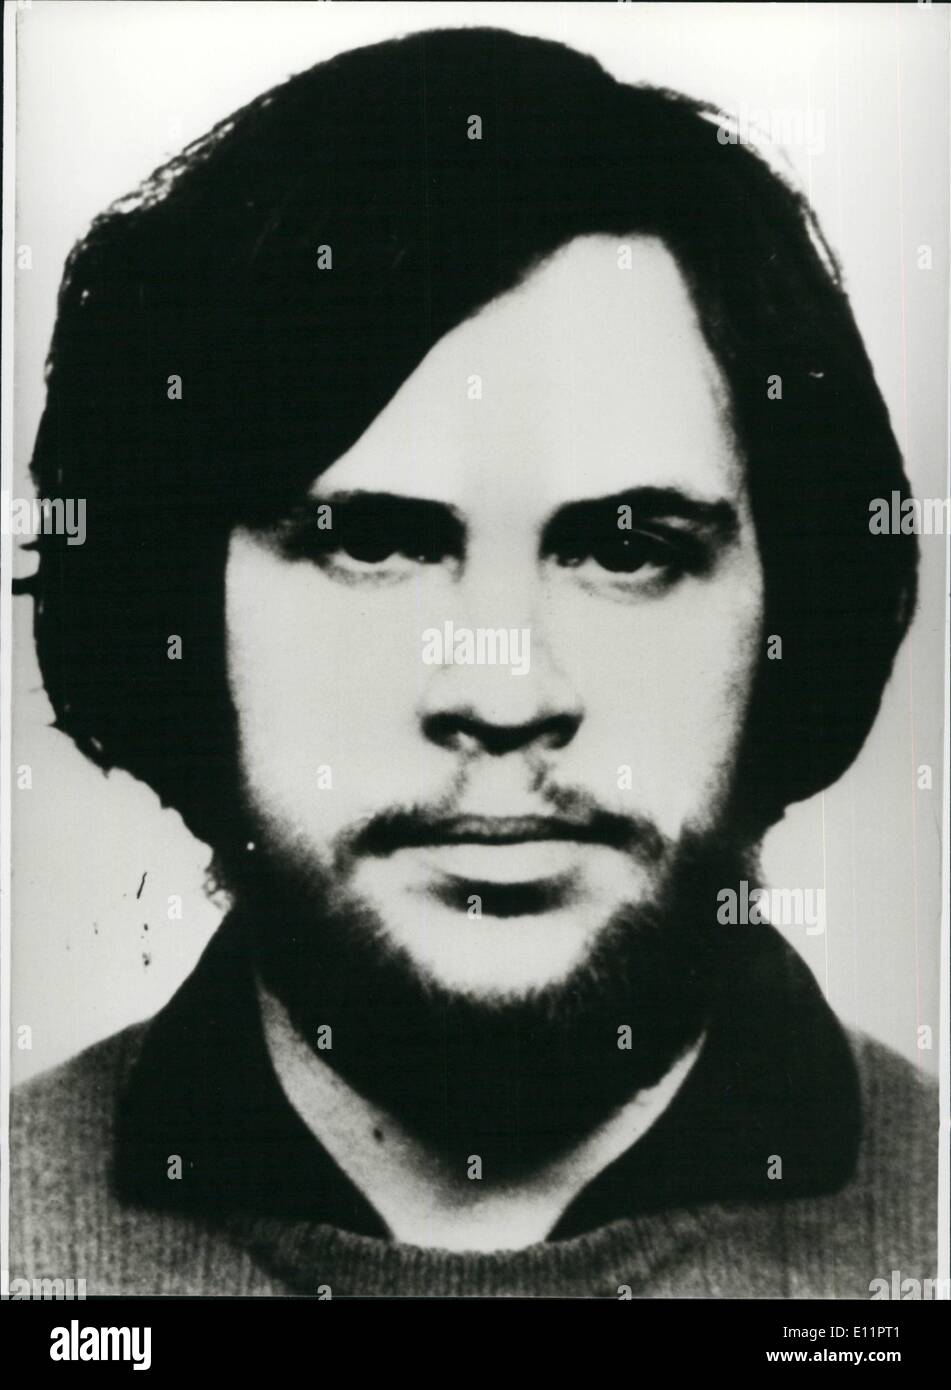 Jun. 06, 1979 - On September 14th 1981 The Trial Against Rolf Heisseler Will Begin In Dusseldorf/West Germany: On September 14th 1981 the trial against the probable terrorist Rolf Heissler (our picture) will begin at the 6th criminal senate of the Regional Court of Appeal of Dusseldorf. The former student and an unknown female person are said to have killed two Dutch customs officials at the German-Dutch frontier of Herzogenrath to Kerkrade. He is also said to have intended to kill two other officers to avoid being arrested Stock Photo